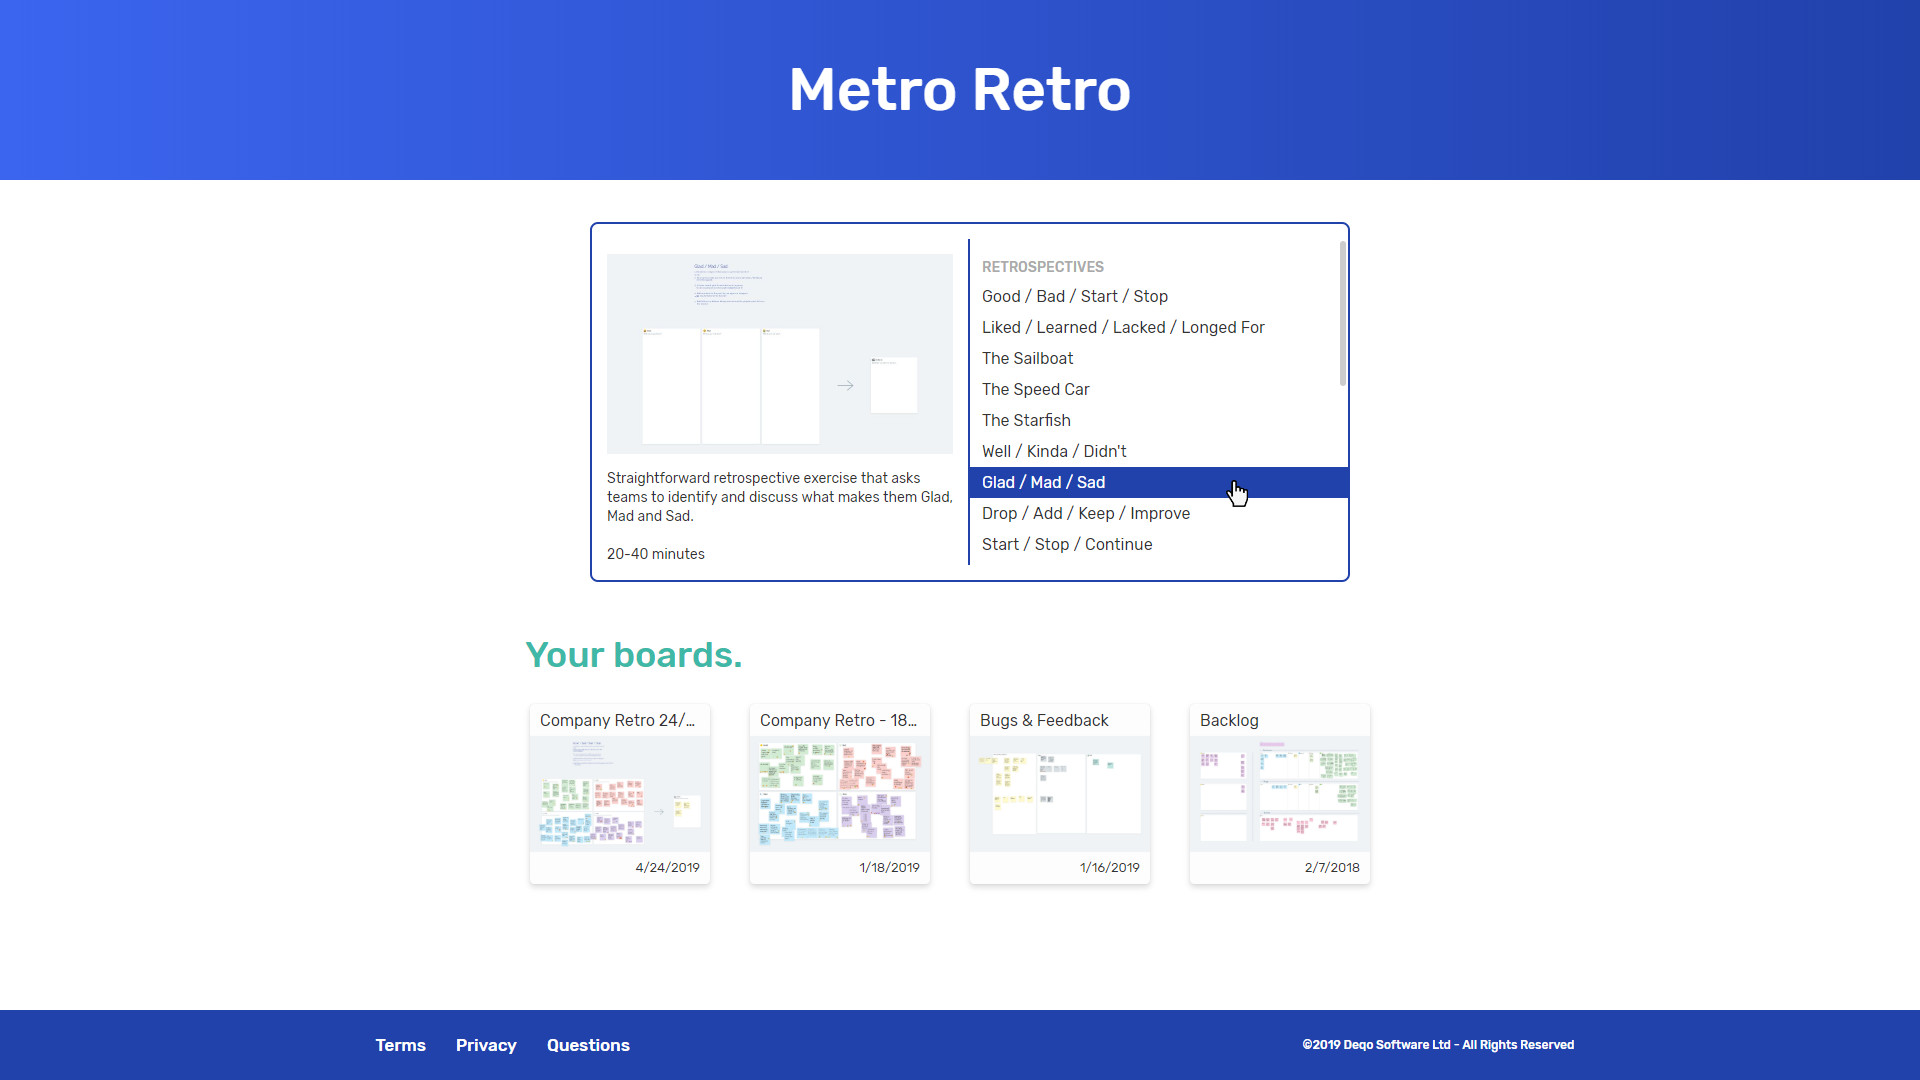 Find pricing, reviews and other details about Metro Retro